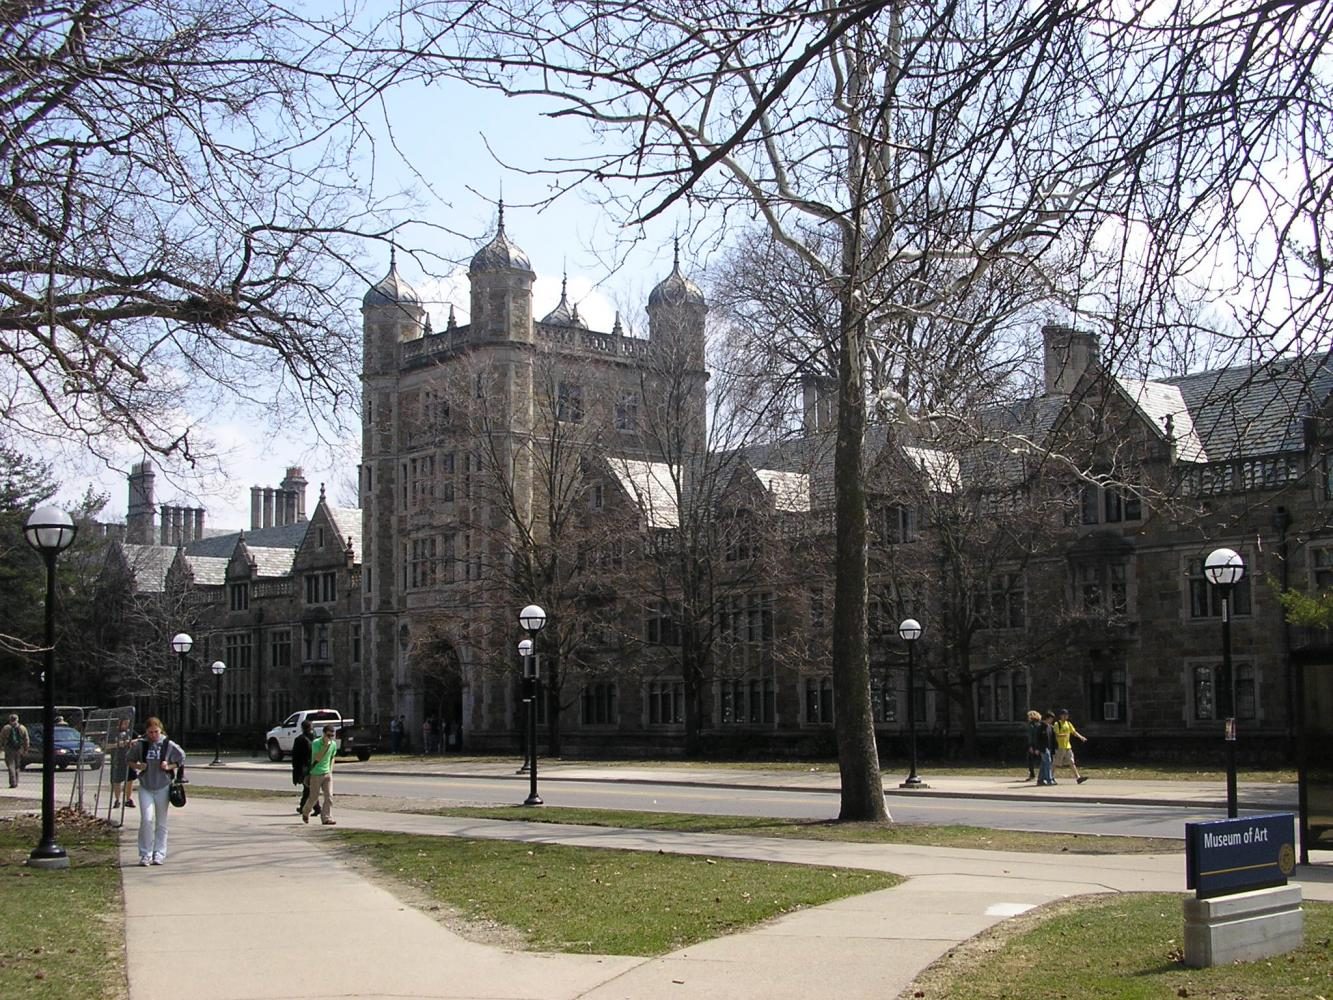 The University of Michigan was founded in 1817. The main campus is in Ann Arbor.